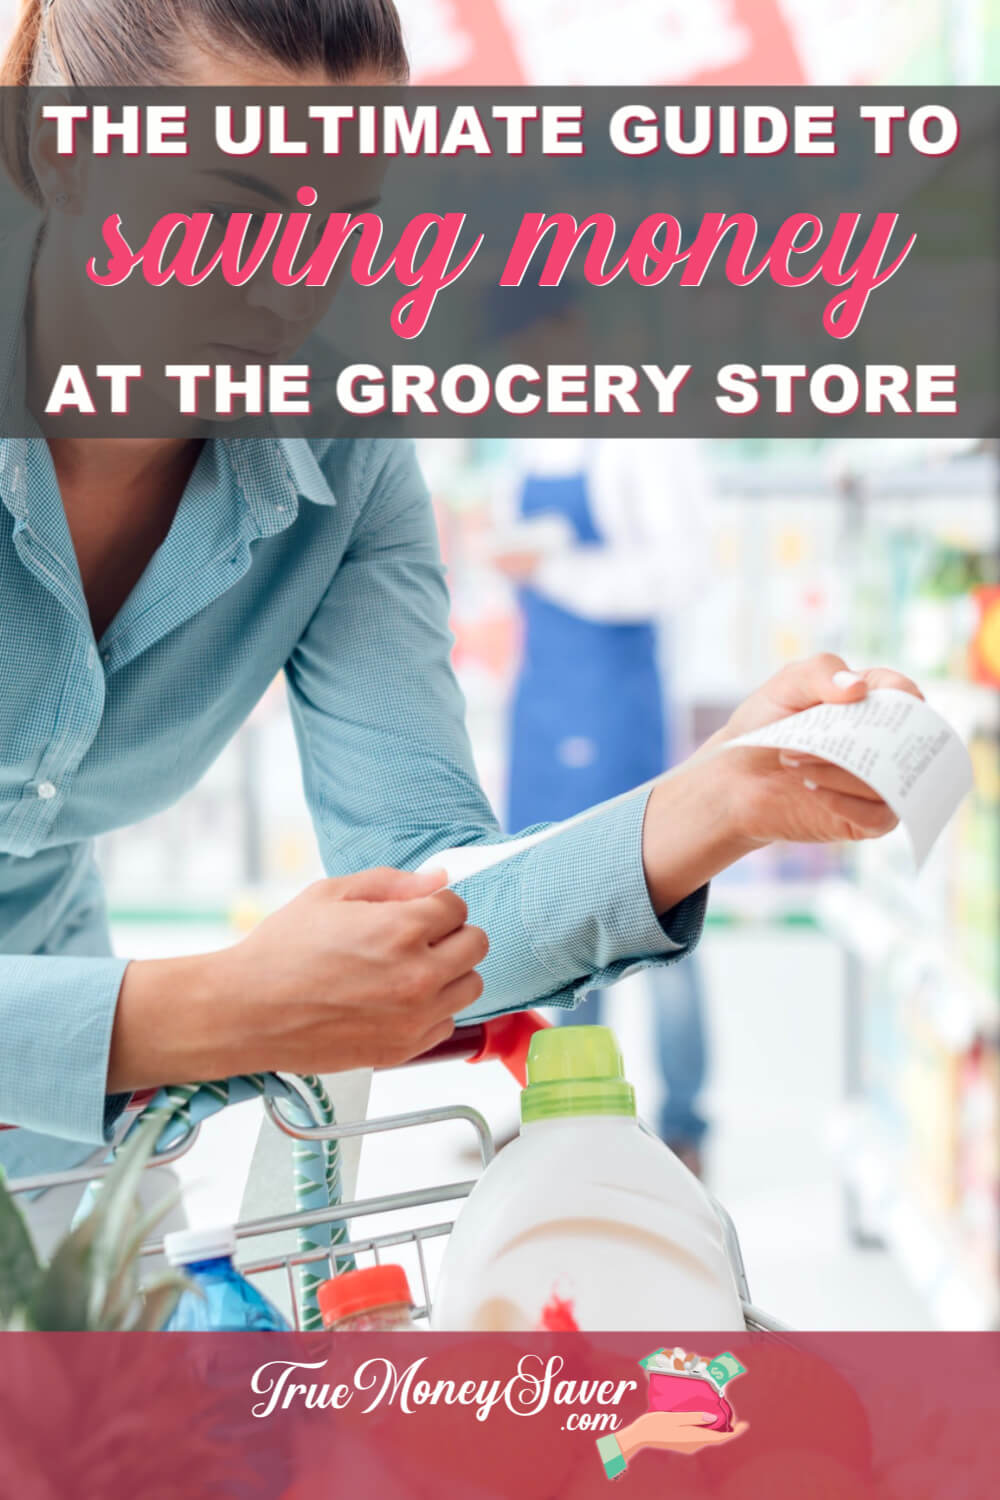 The Ultimate Guide To Saving Money At The Grocery Store